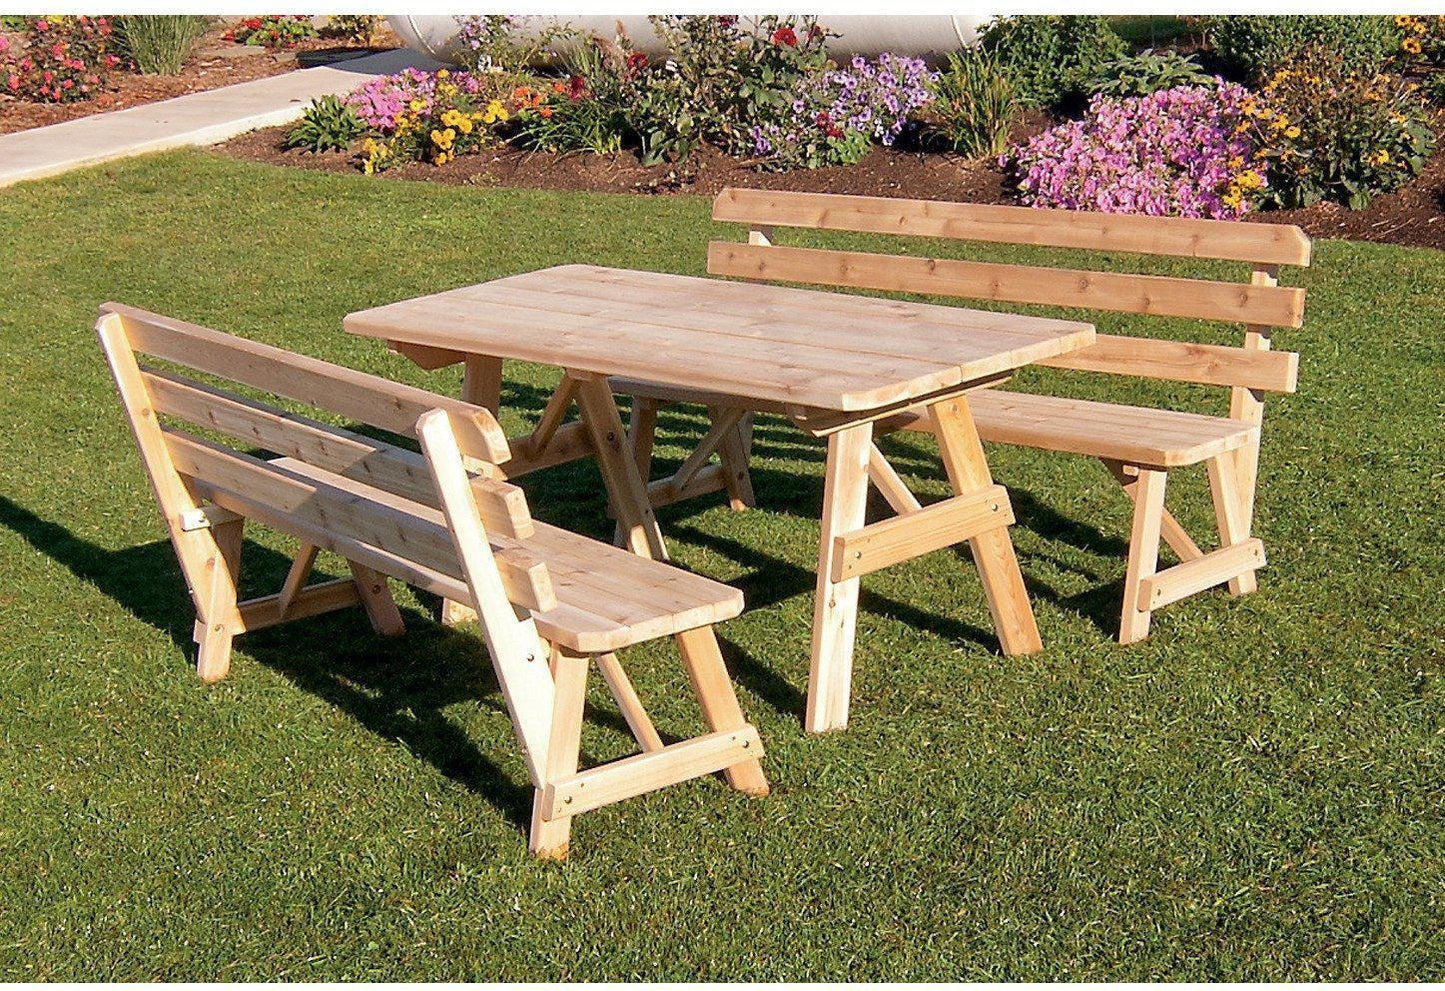 A & L FURNITURE CO. Western Red Cedar 5' Table w/2 Backed Benches - Specify for FREE 2" Umbrella Hole  - Ships FREE in 5-7 Business days - Rocking Furniture